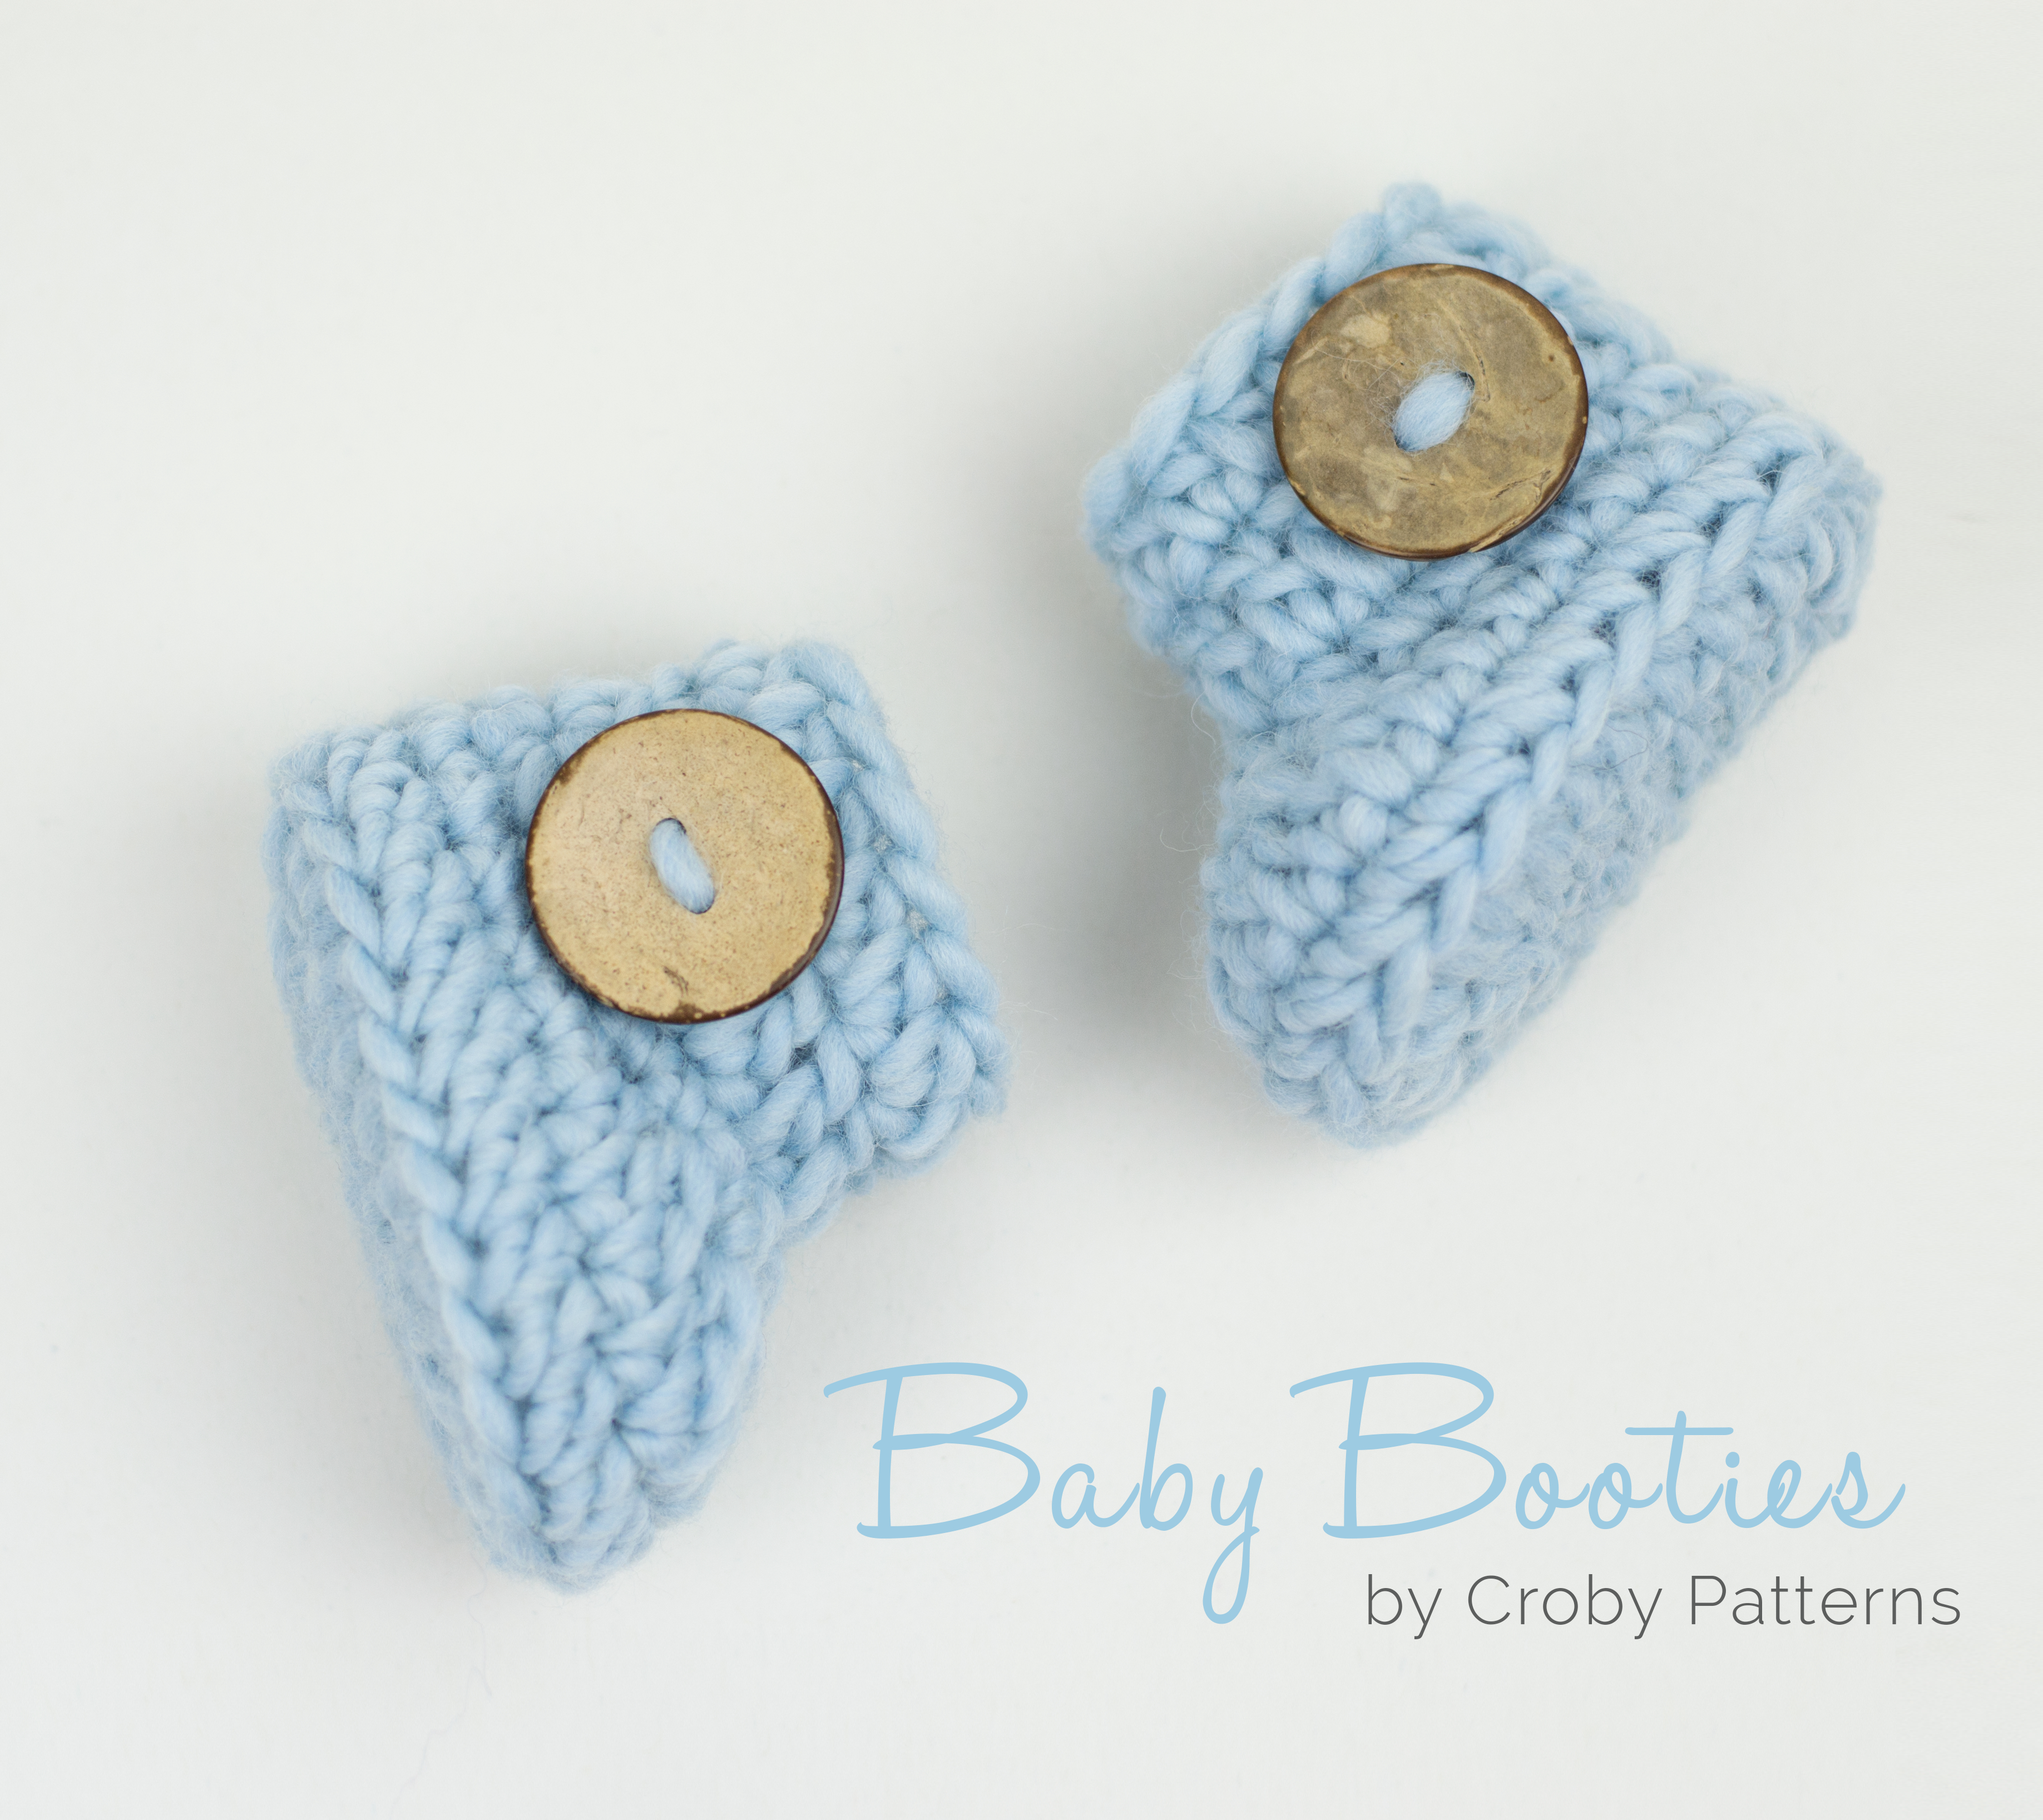 Crochet Pattern For Baby Booties Crochet Ba Booties In 15 Minutes Or Less Cro Patterns